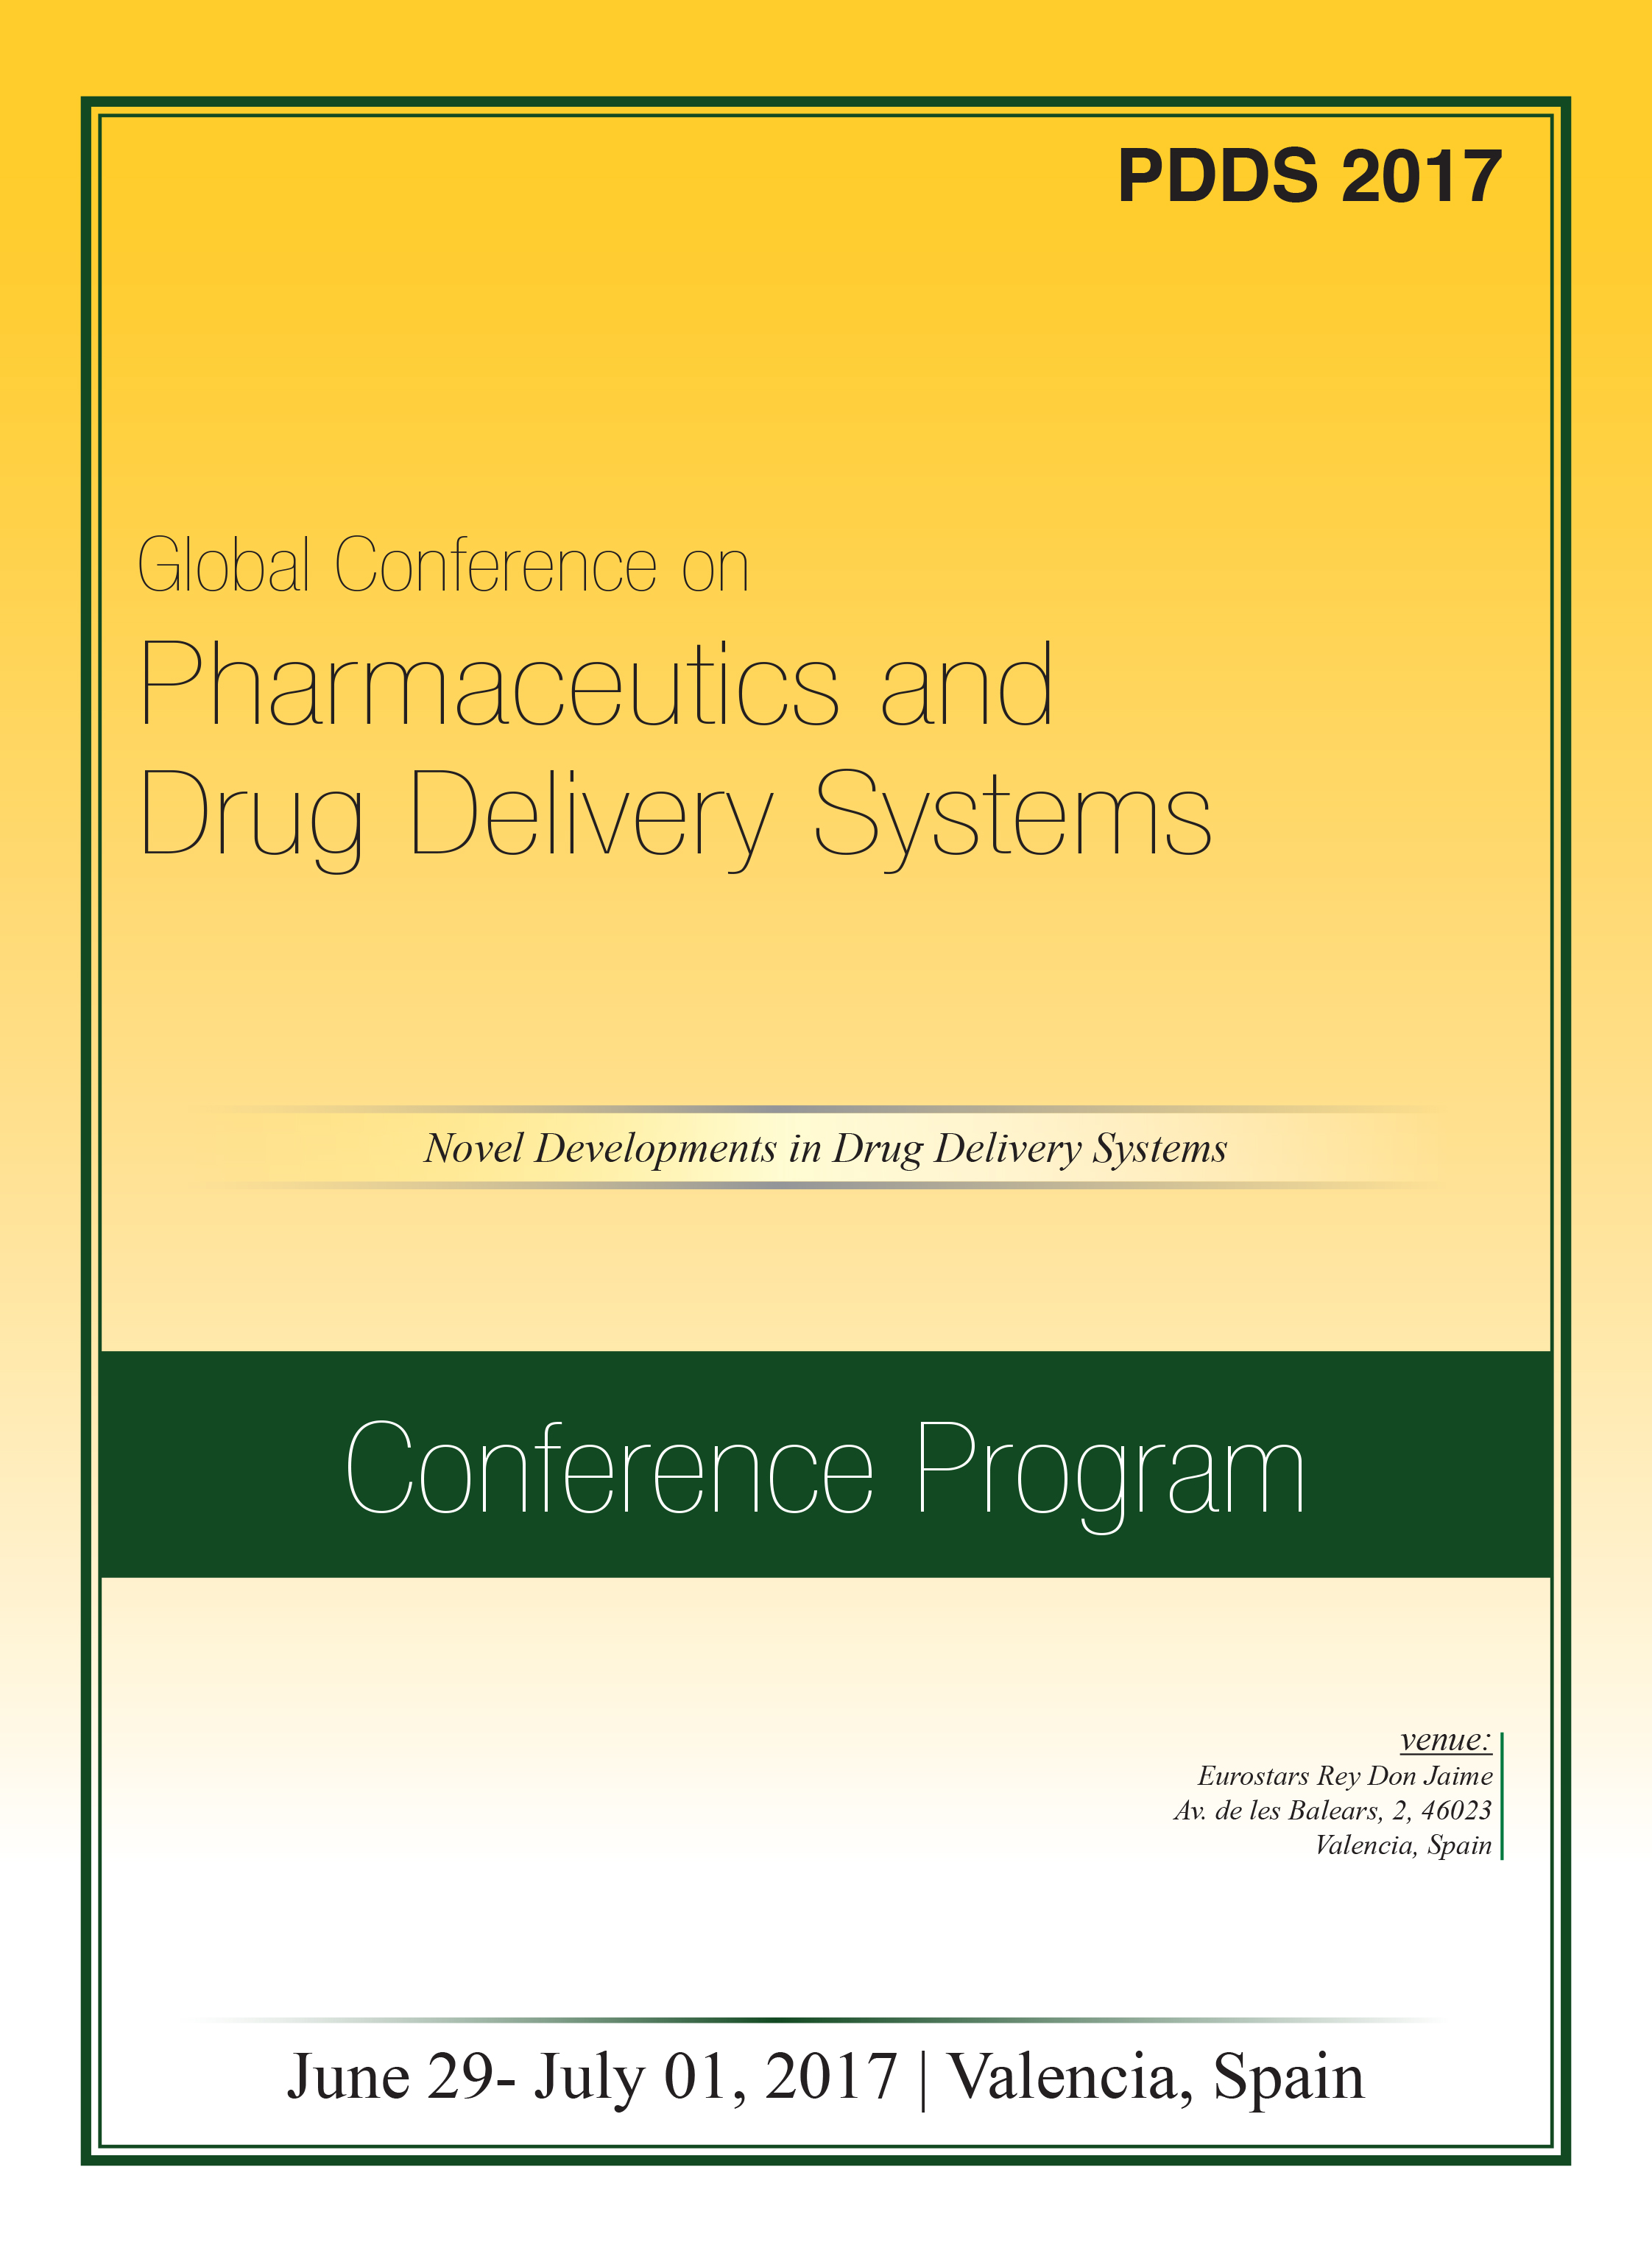 Global Conference on Pharmaceutics and Drug Delivery Systems | Valencia, Spain Program